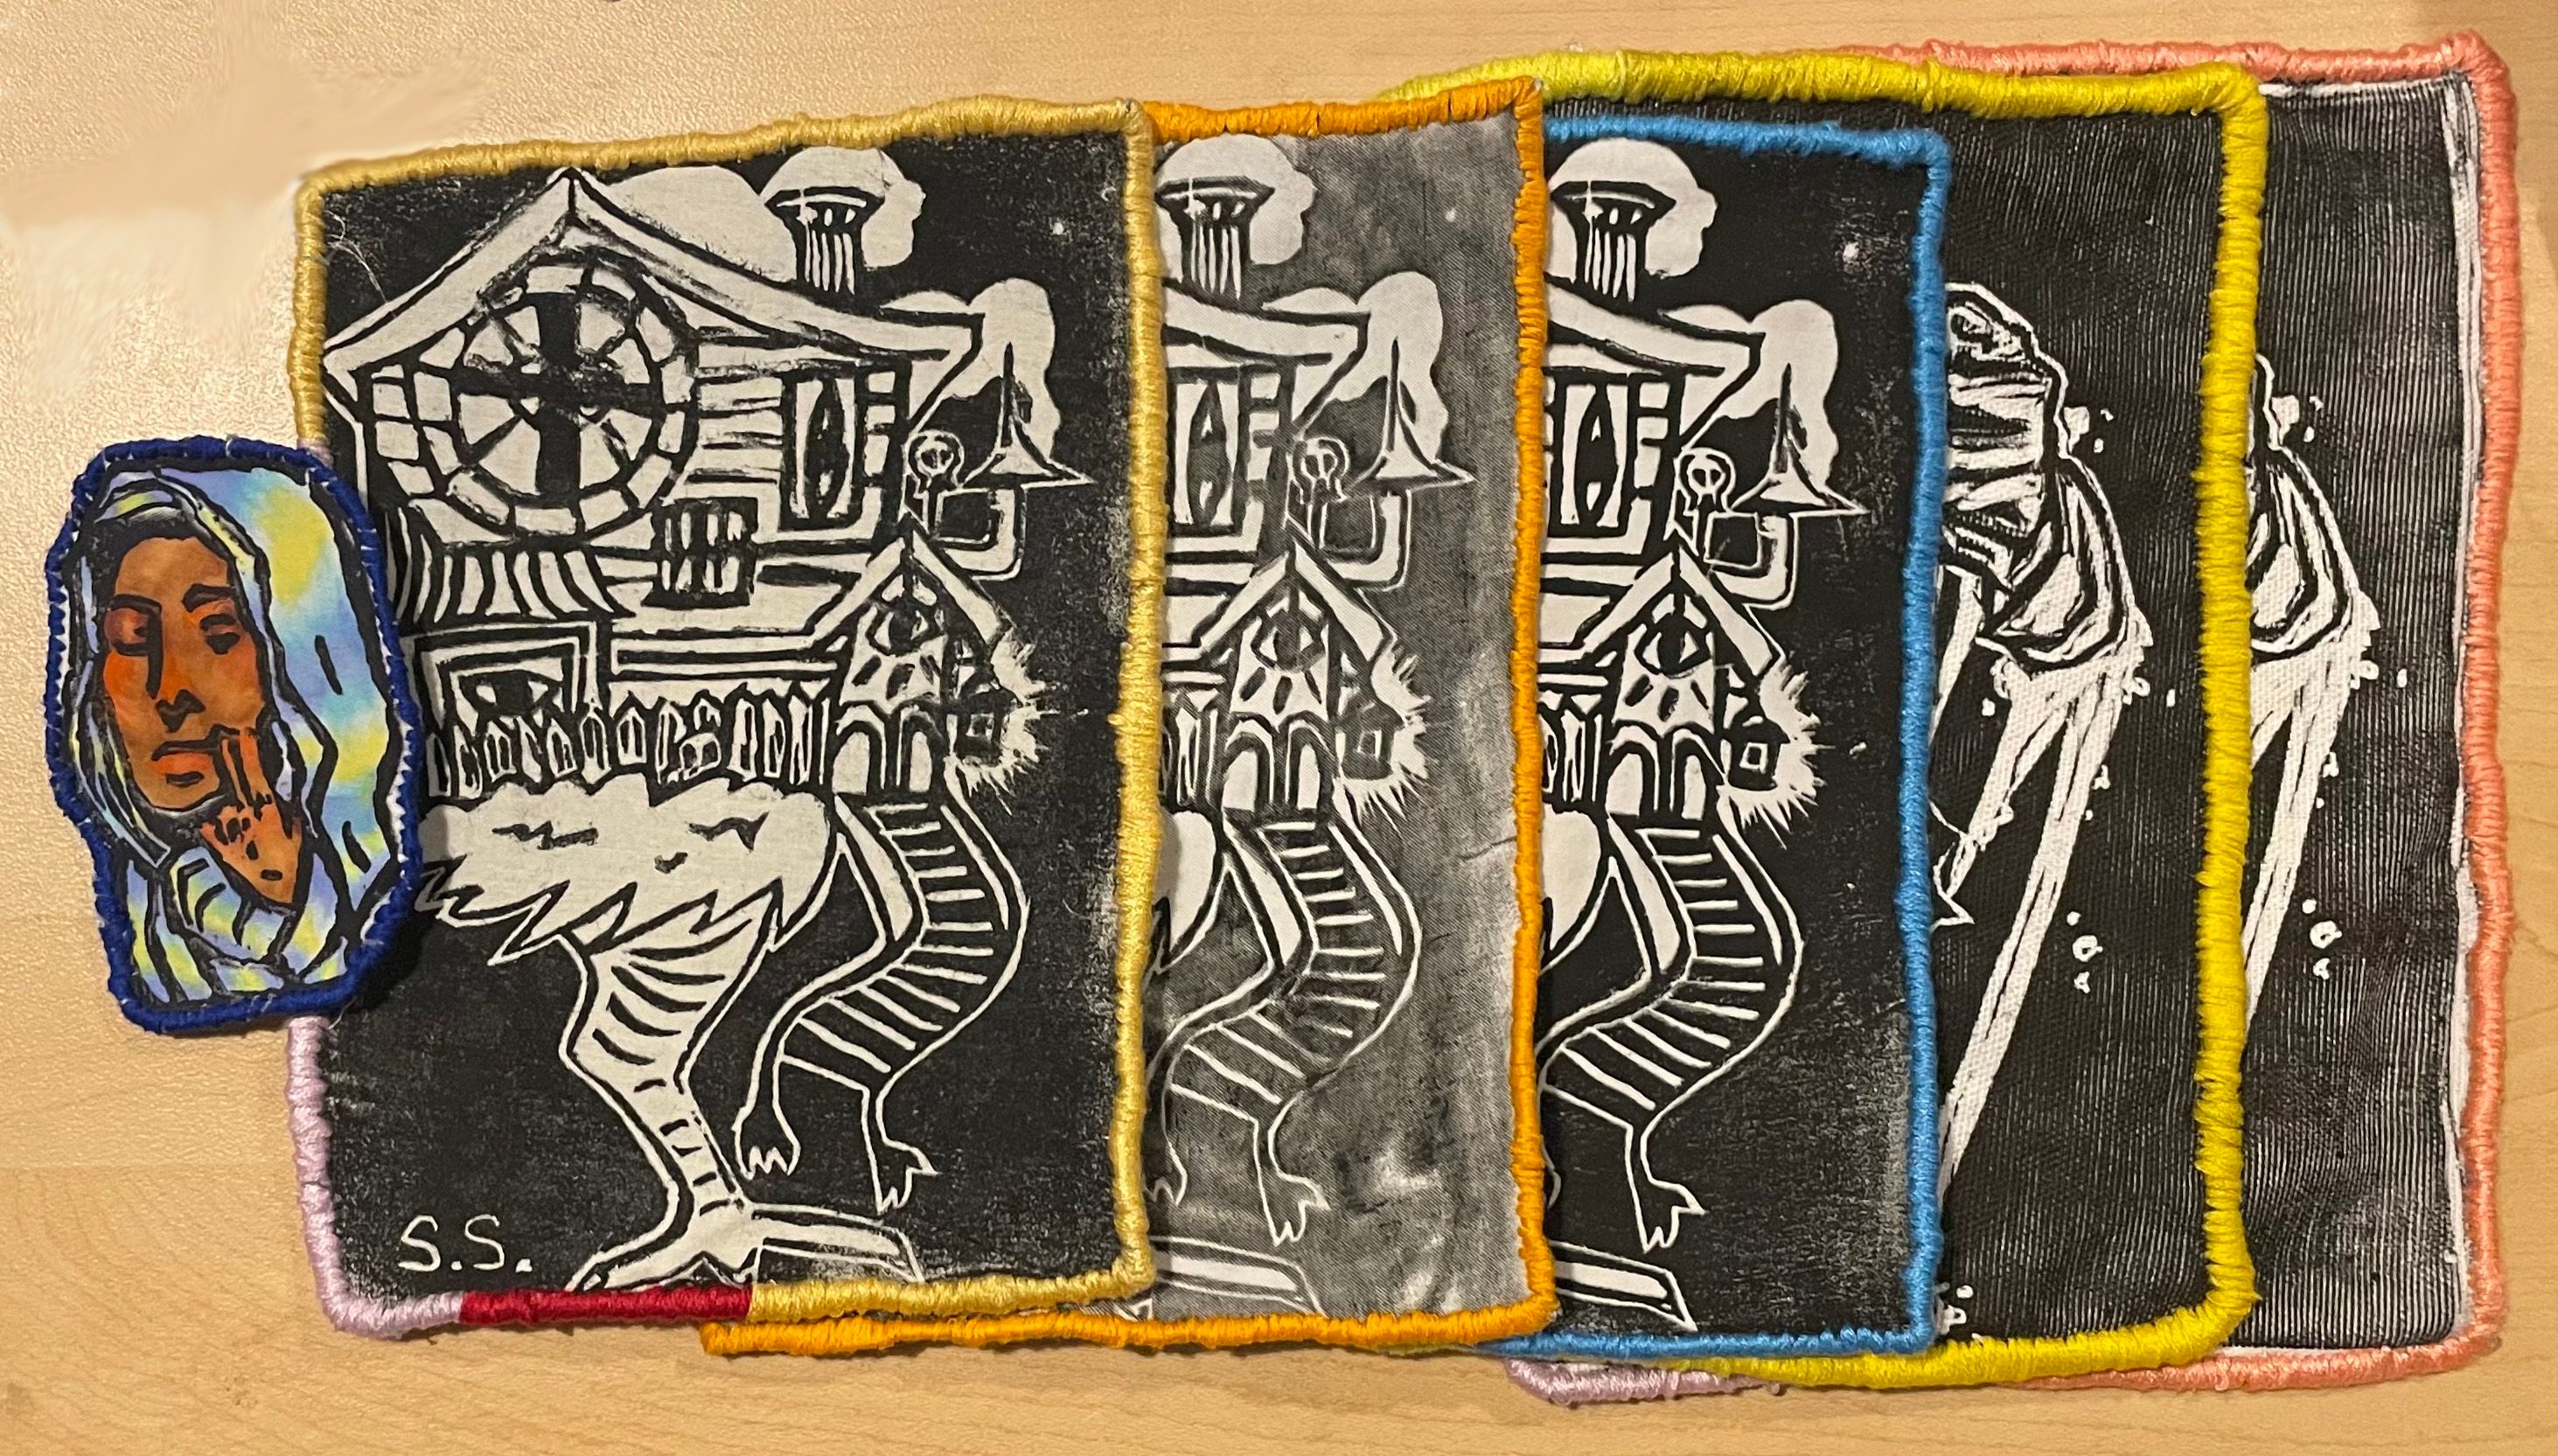 A series of patches with imagery of a house walking on bird legs.